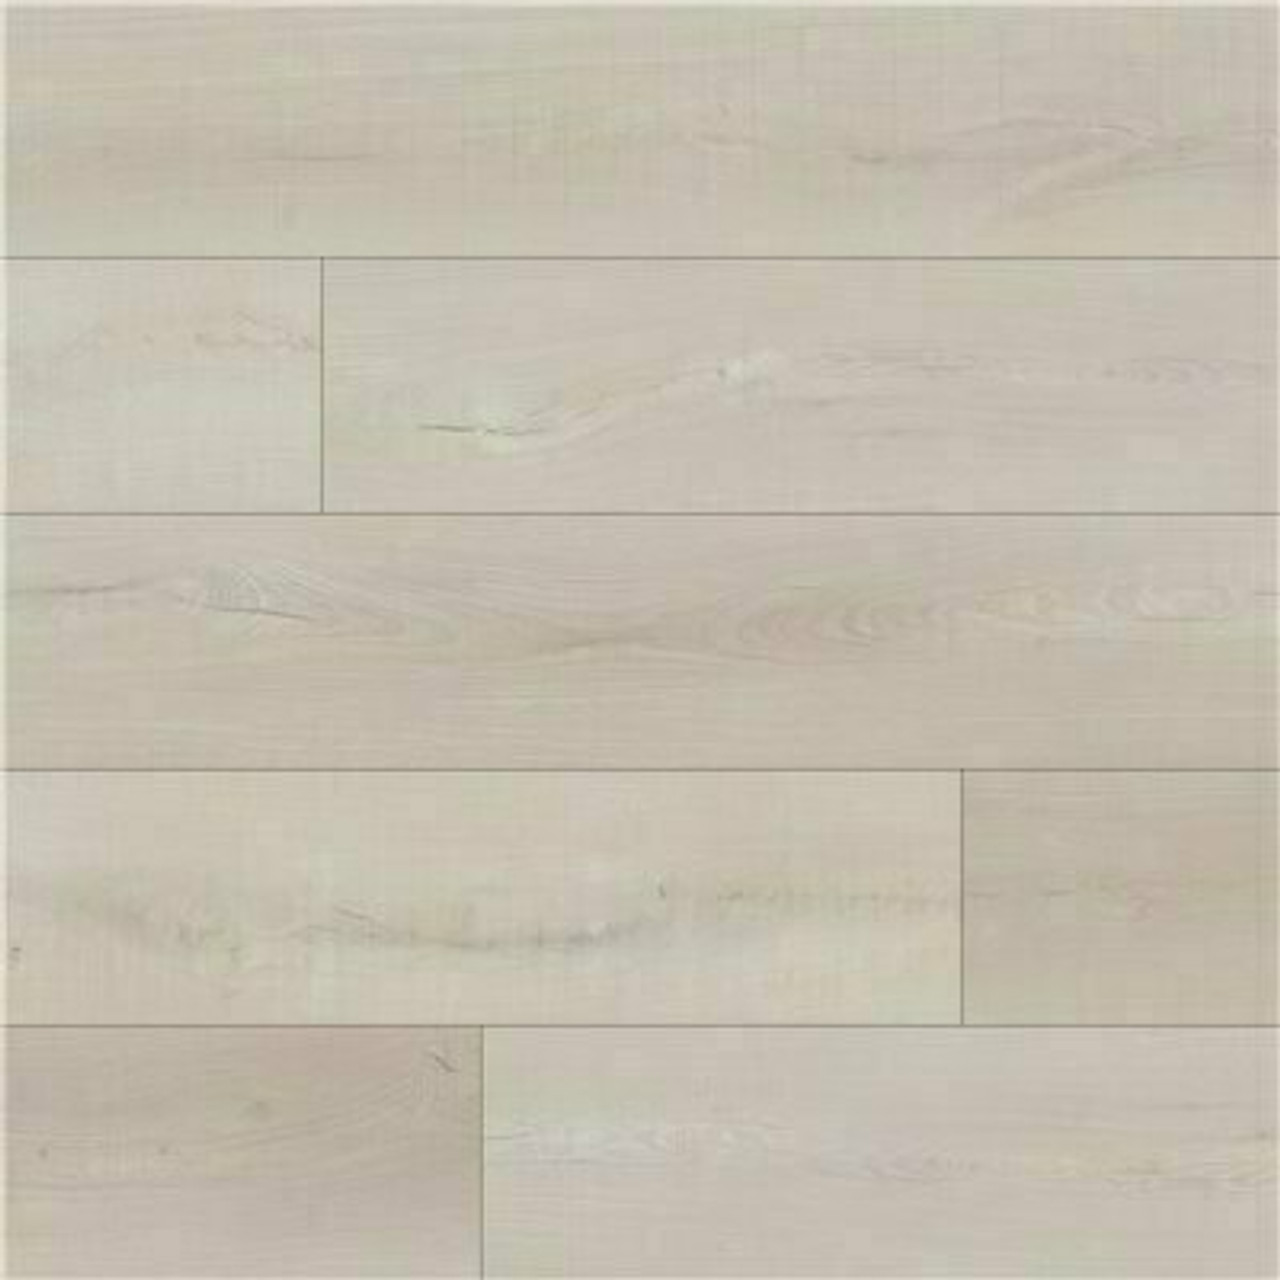 A&A Surfaces Piedmont Whitmore White 7 In. X 48 In. Rigid Core Luxury Vinyl Plank Flooring (23.8 Sq. Ft./Case)